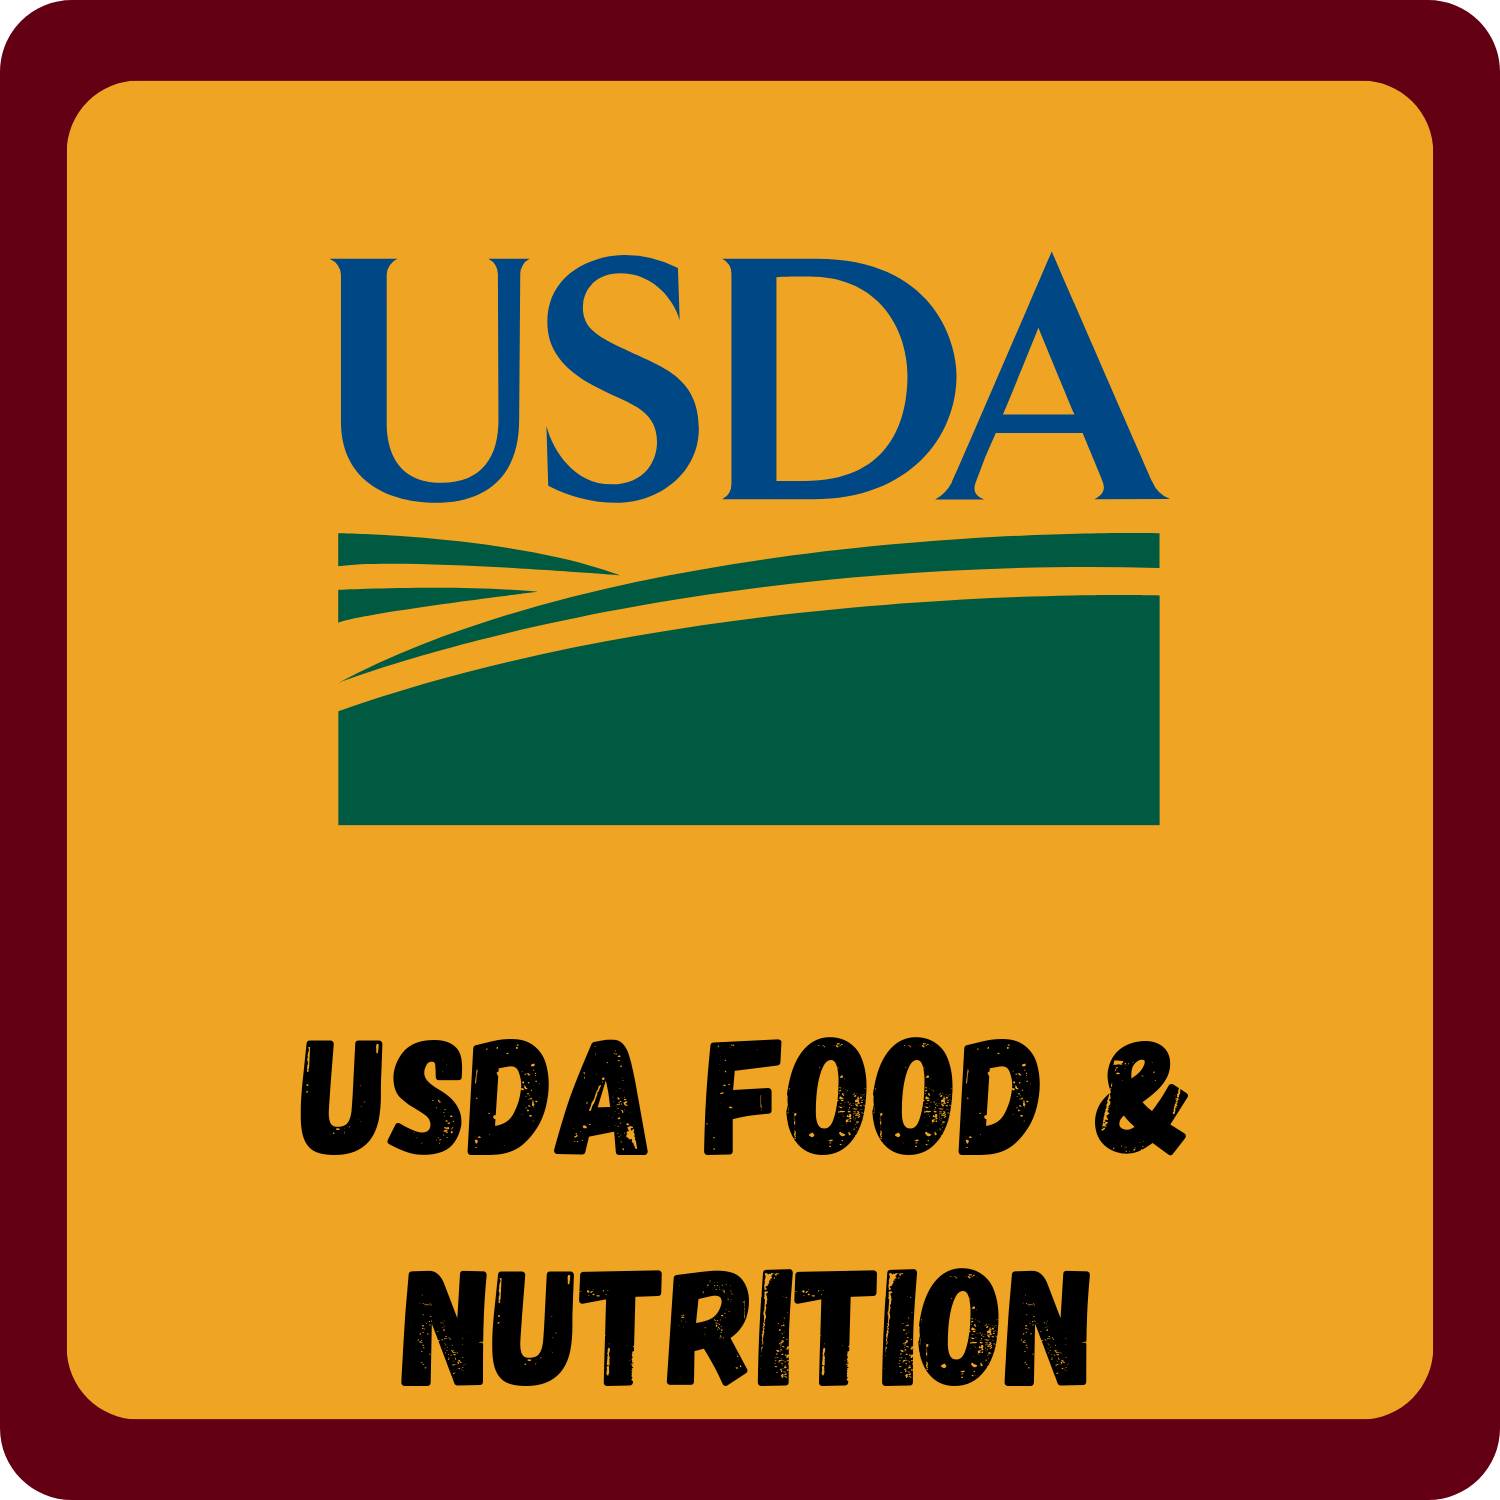 USDA Food and Nutrition (opens new site in new tab)